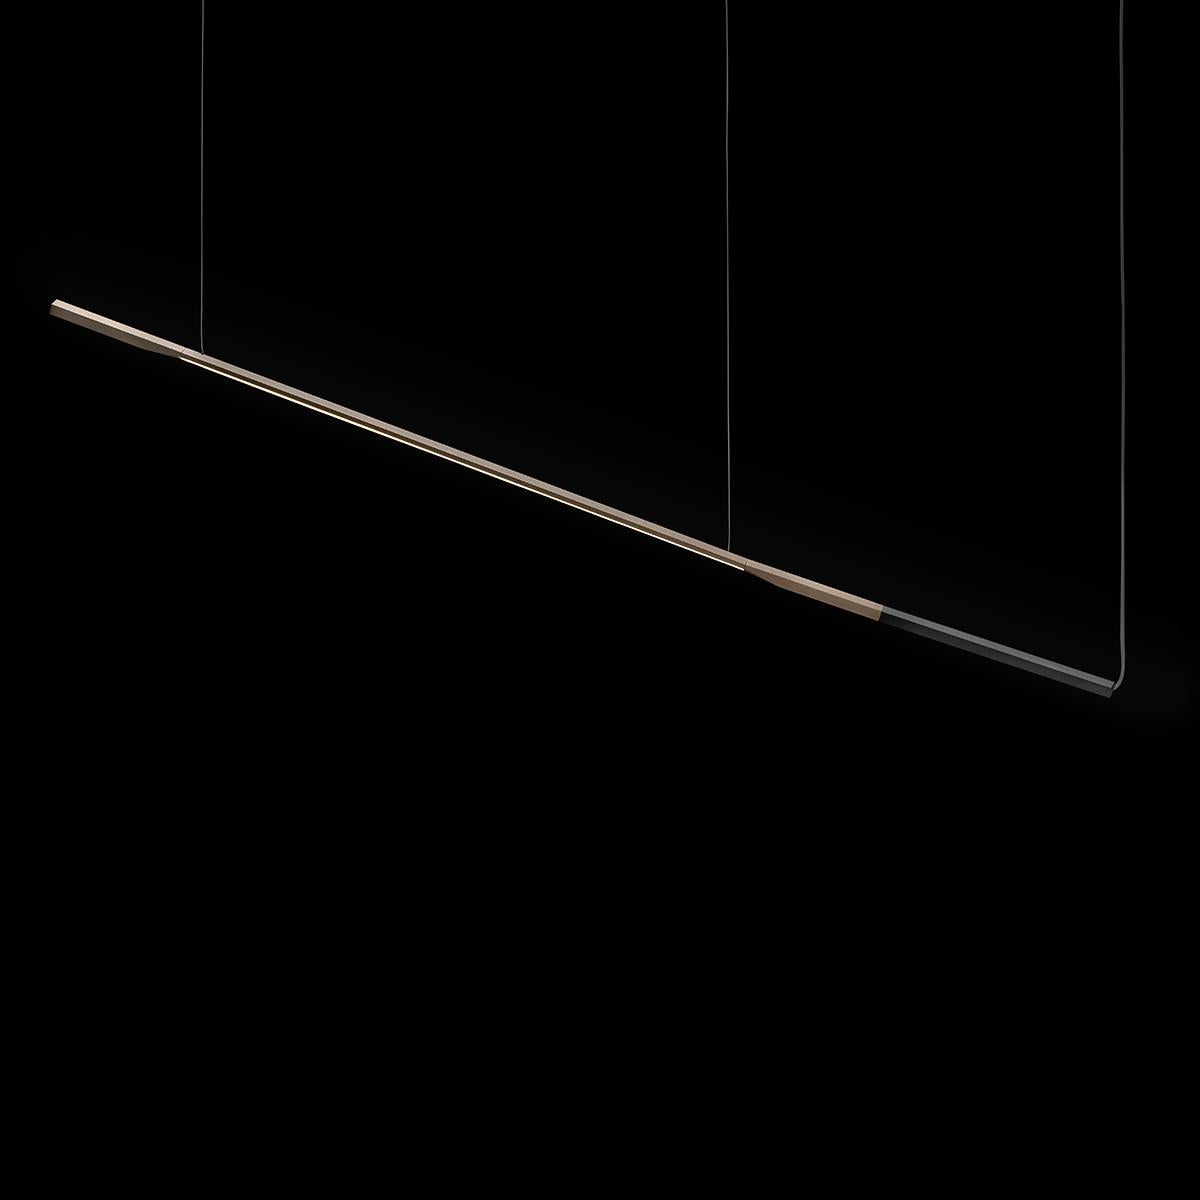 Suspension lamp 'Ilo' designed by David Lopez Quincoce in 2019.
Suspension led lamp giving direct light in metal. Aluminium rod structure anodized in satin bronze with anodized matt black terminal. Manufactured by Oluce, Italy.

The Ilo range,